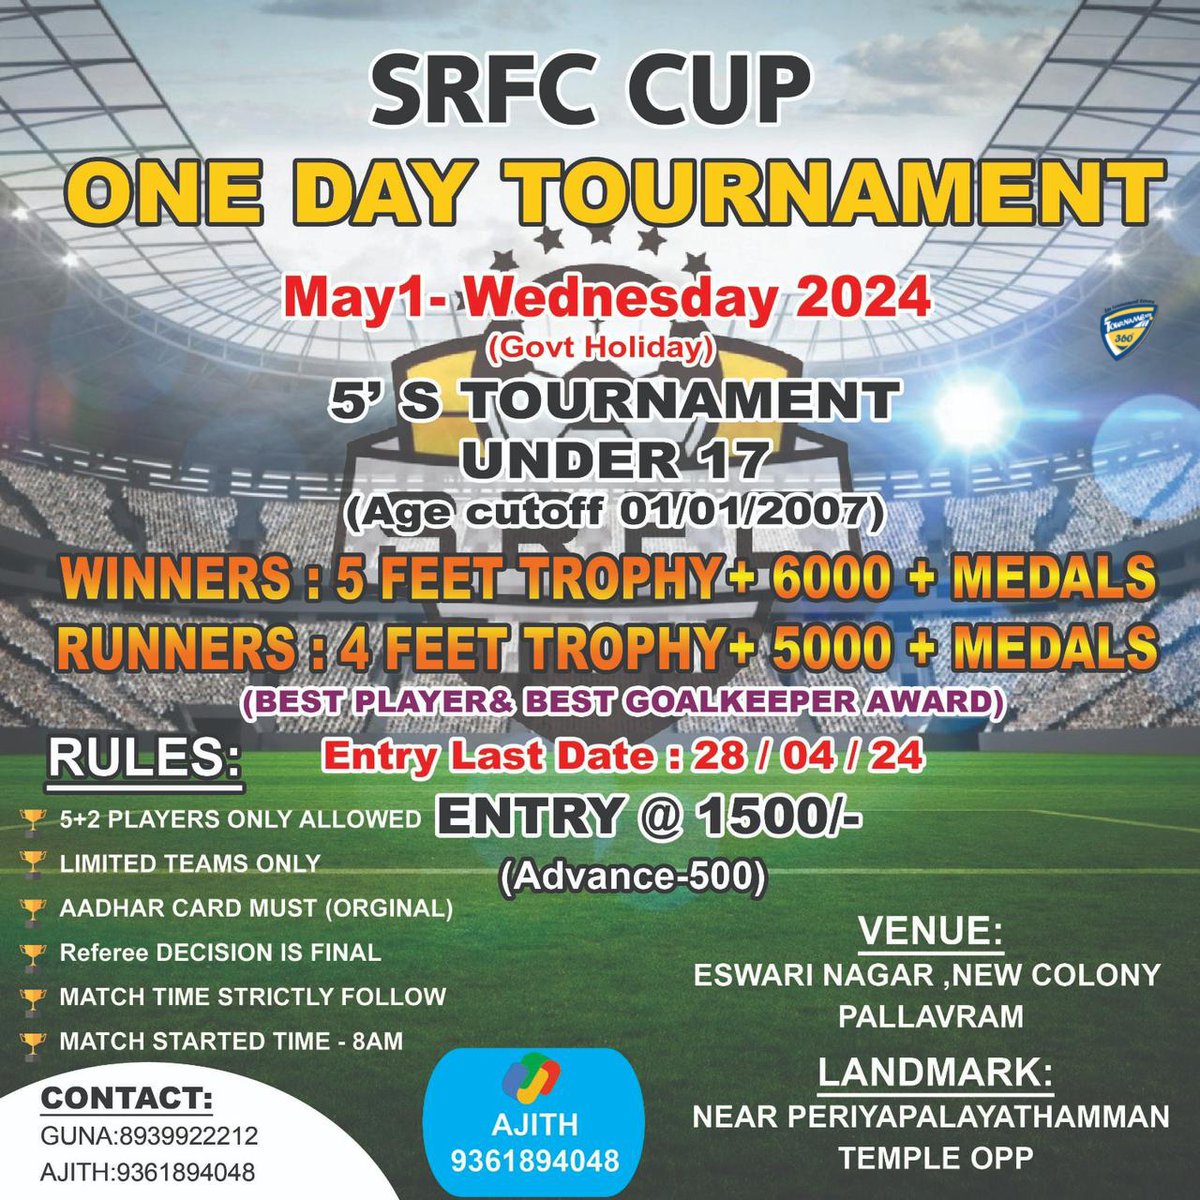 SRFC Cup Under 17 - 5s #Football #Tournament. The tournament to be held on 1st May 2024. Held at Pallavaram, #Chennai. @tournaments_360 @fni